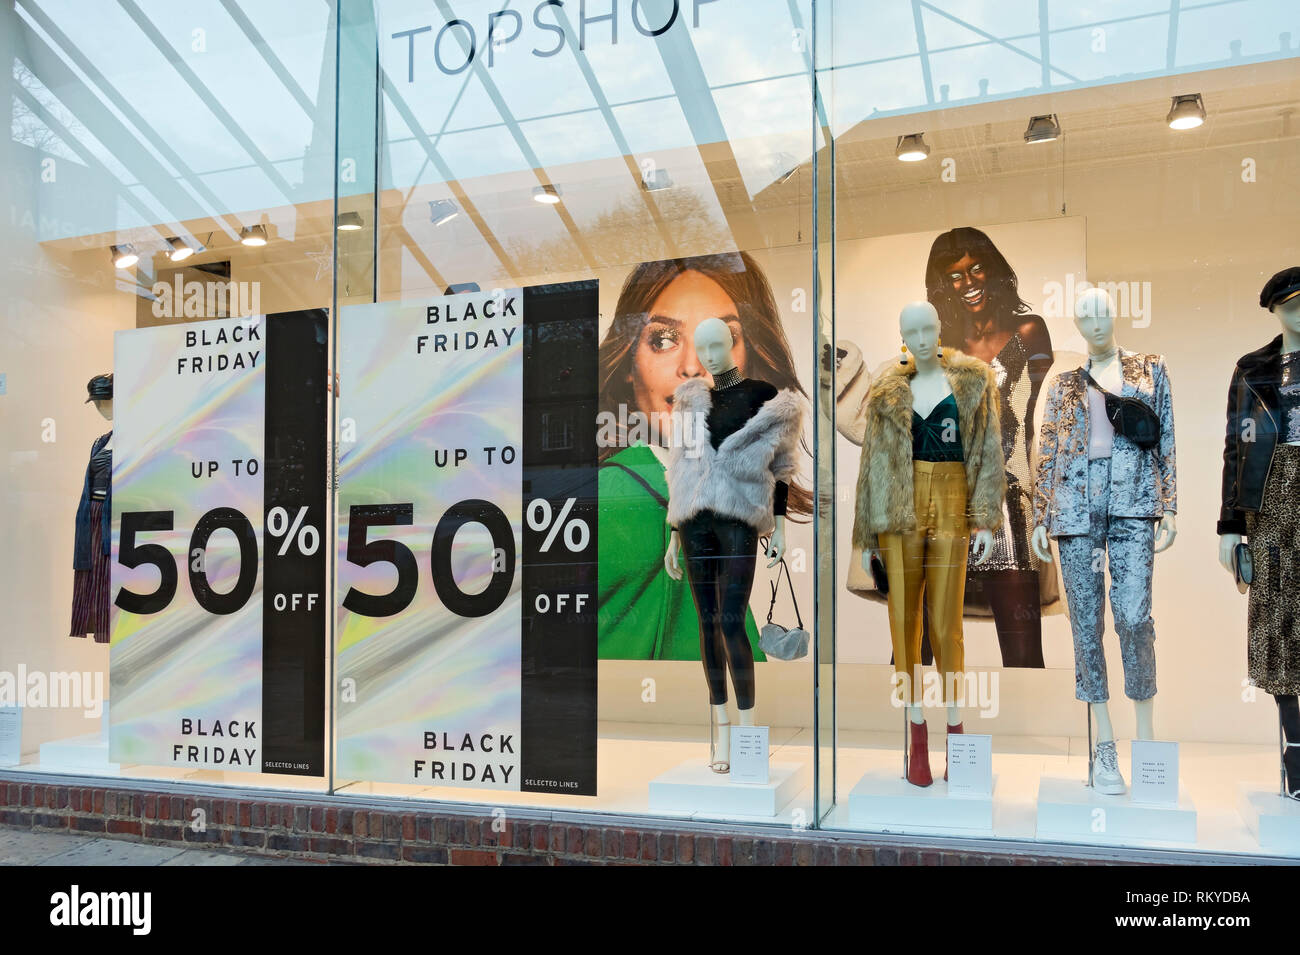 Black Friday signs on Topshop shop window Stock Photo - Alamy